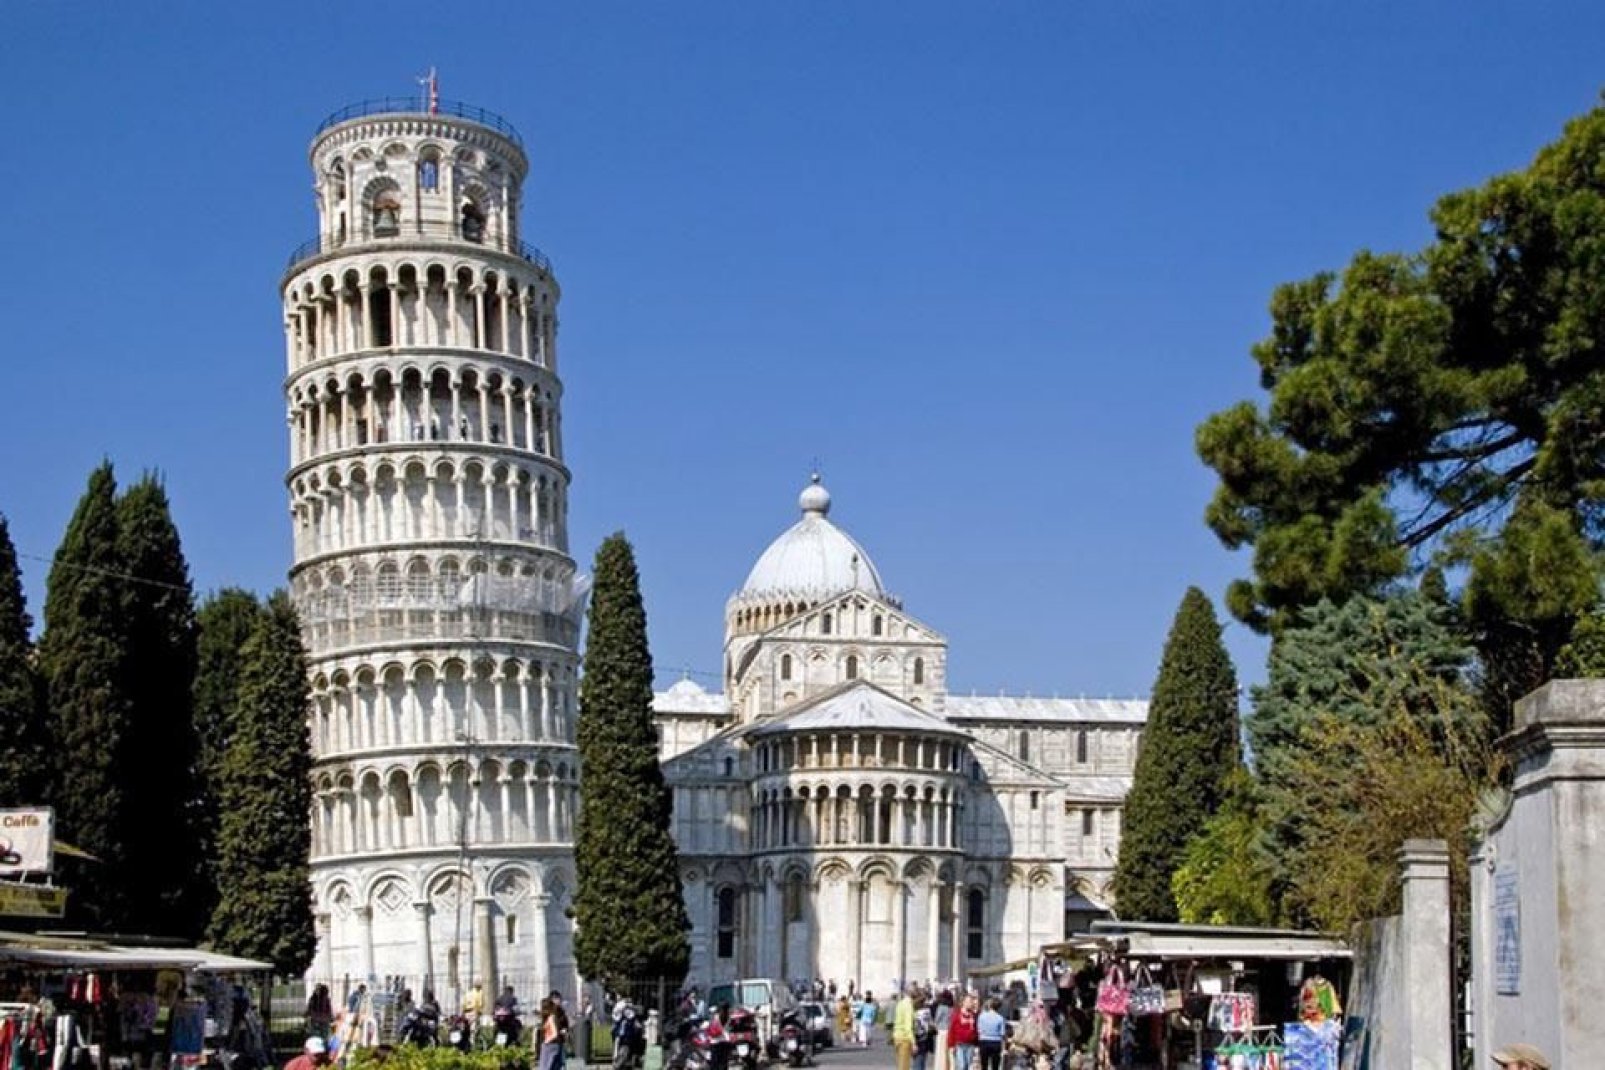 The architectural complex that is the Piazza dei Miracoli is the biggest artistic centre in Pisa, declared a World Heritage Site by UNESCO.